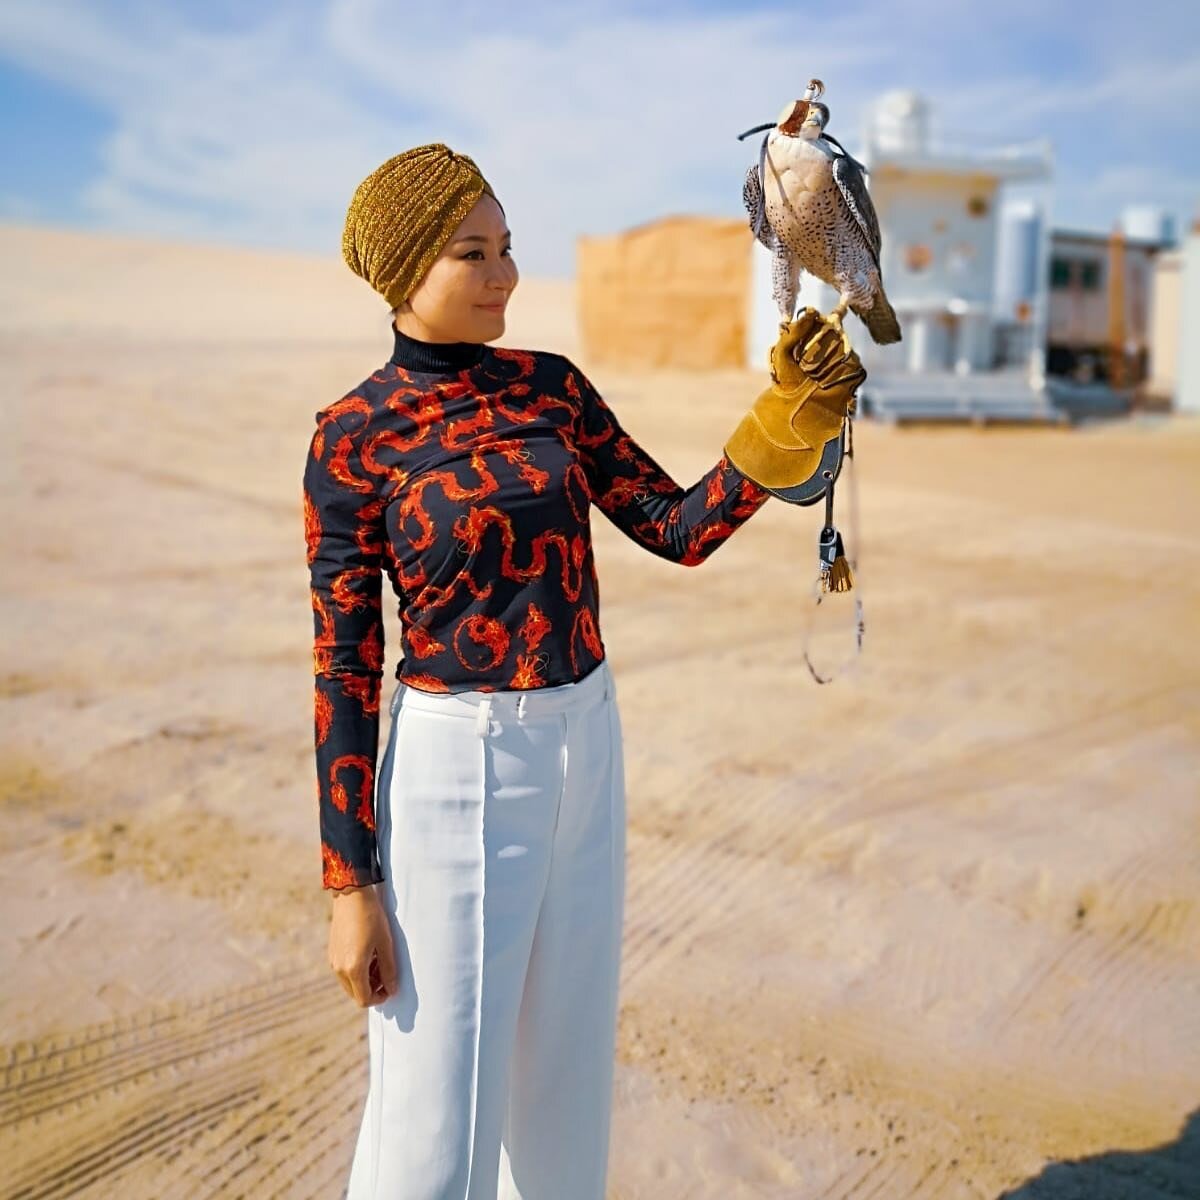 ...another day in Qatar...enjoying a morning trip into the dessert before performing the next shows later today. #qatar #doha #dessert #hawkeye #hawk #manaodrumsofchina